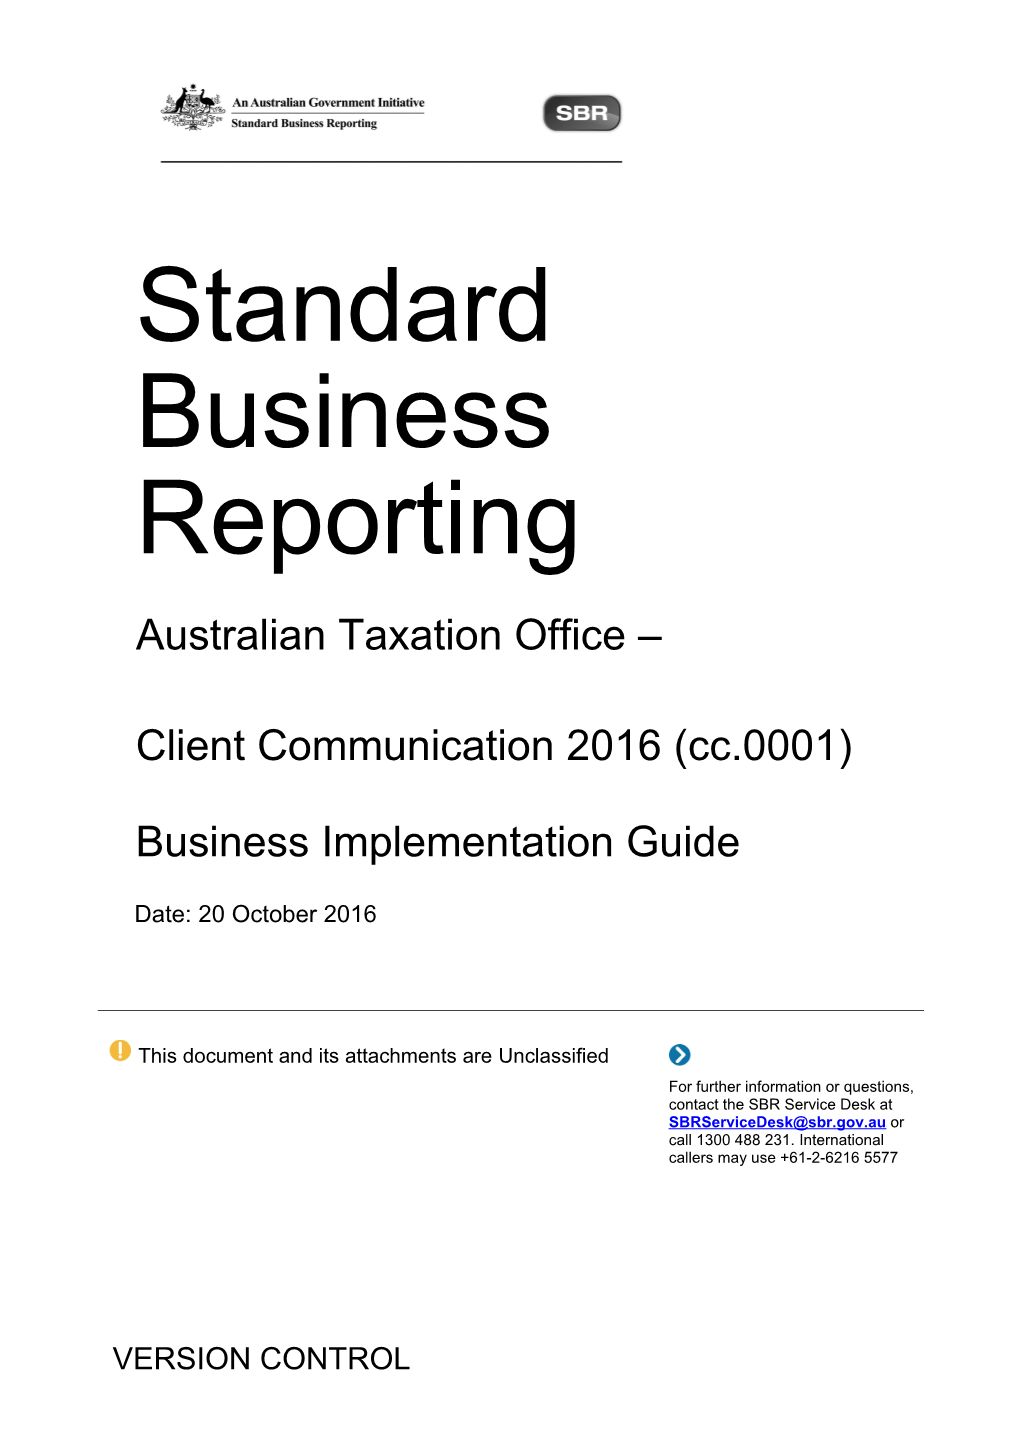 ATO CC.0001 2016 Business Implementation Guide